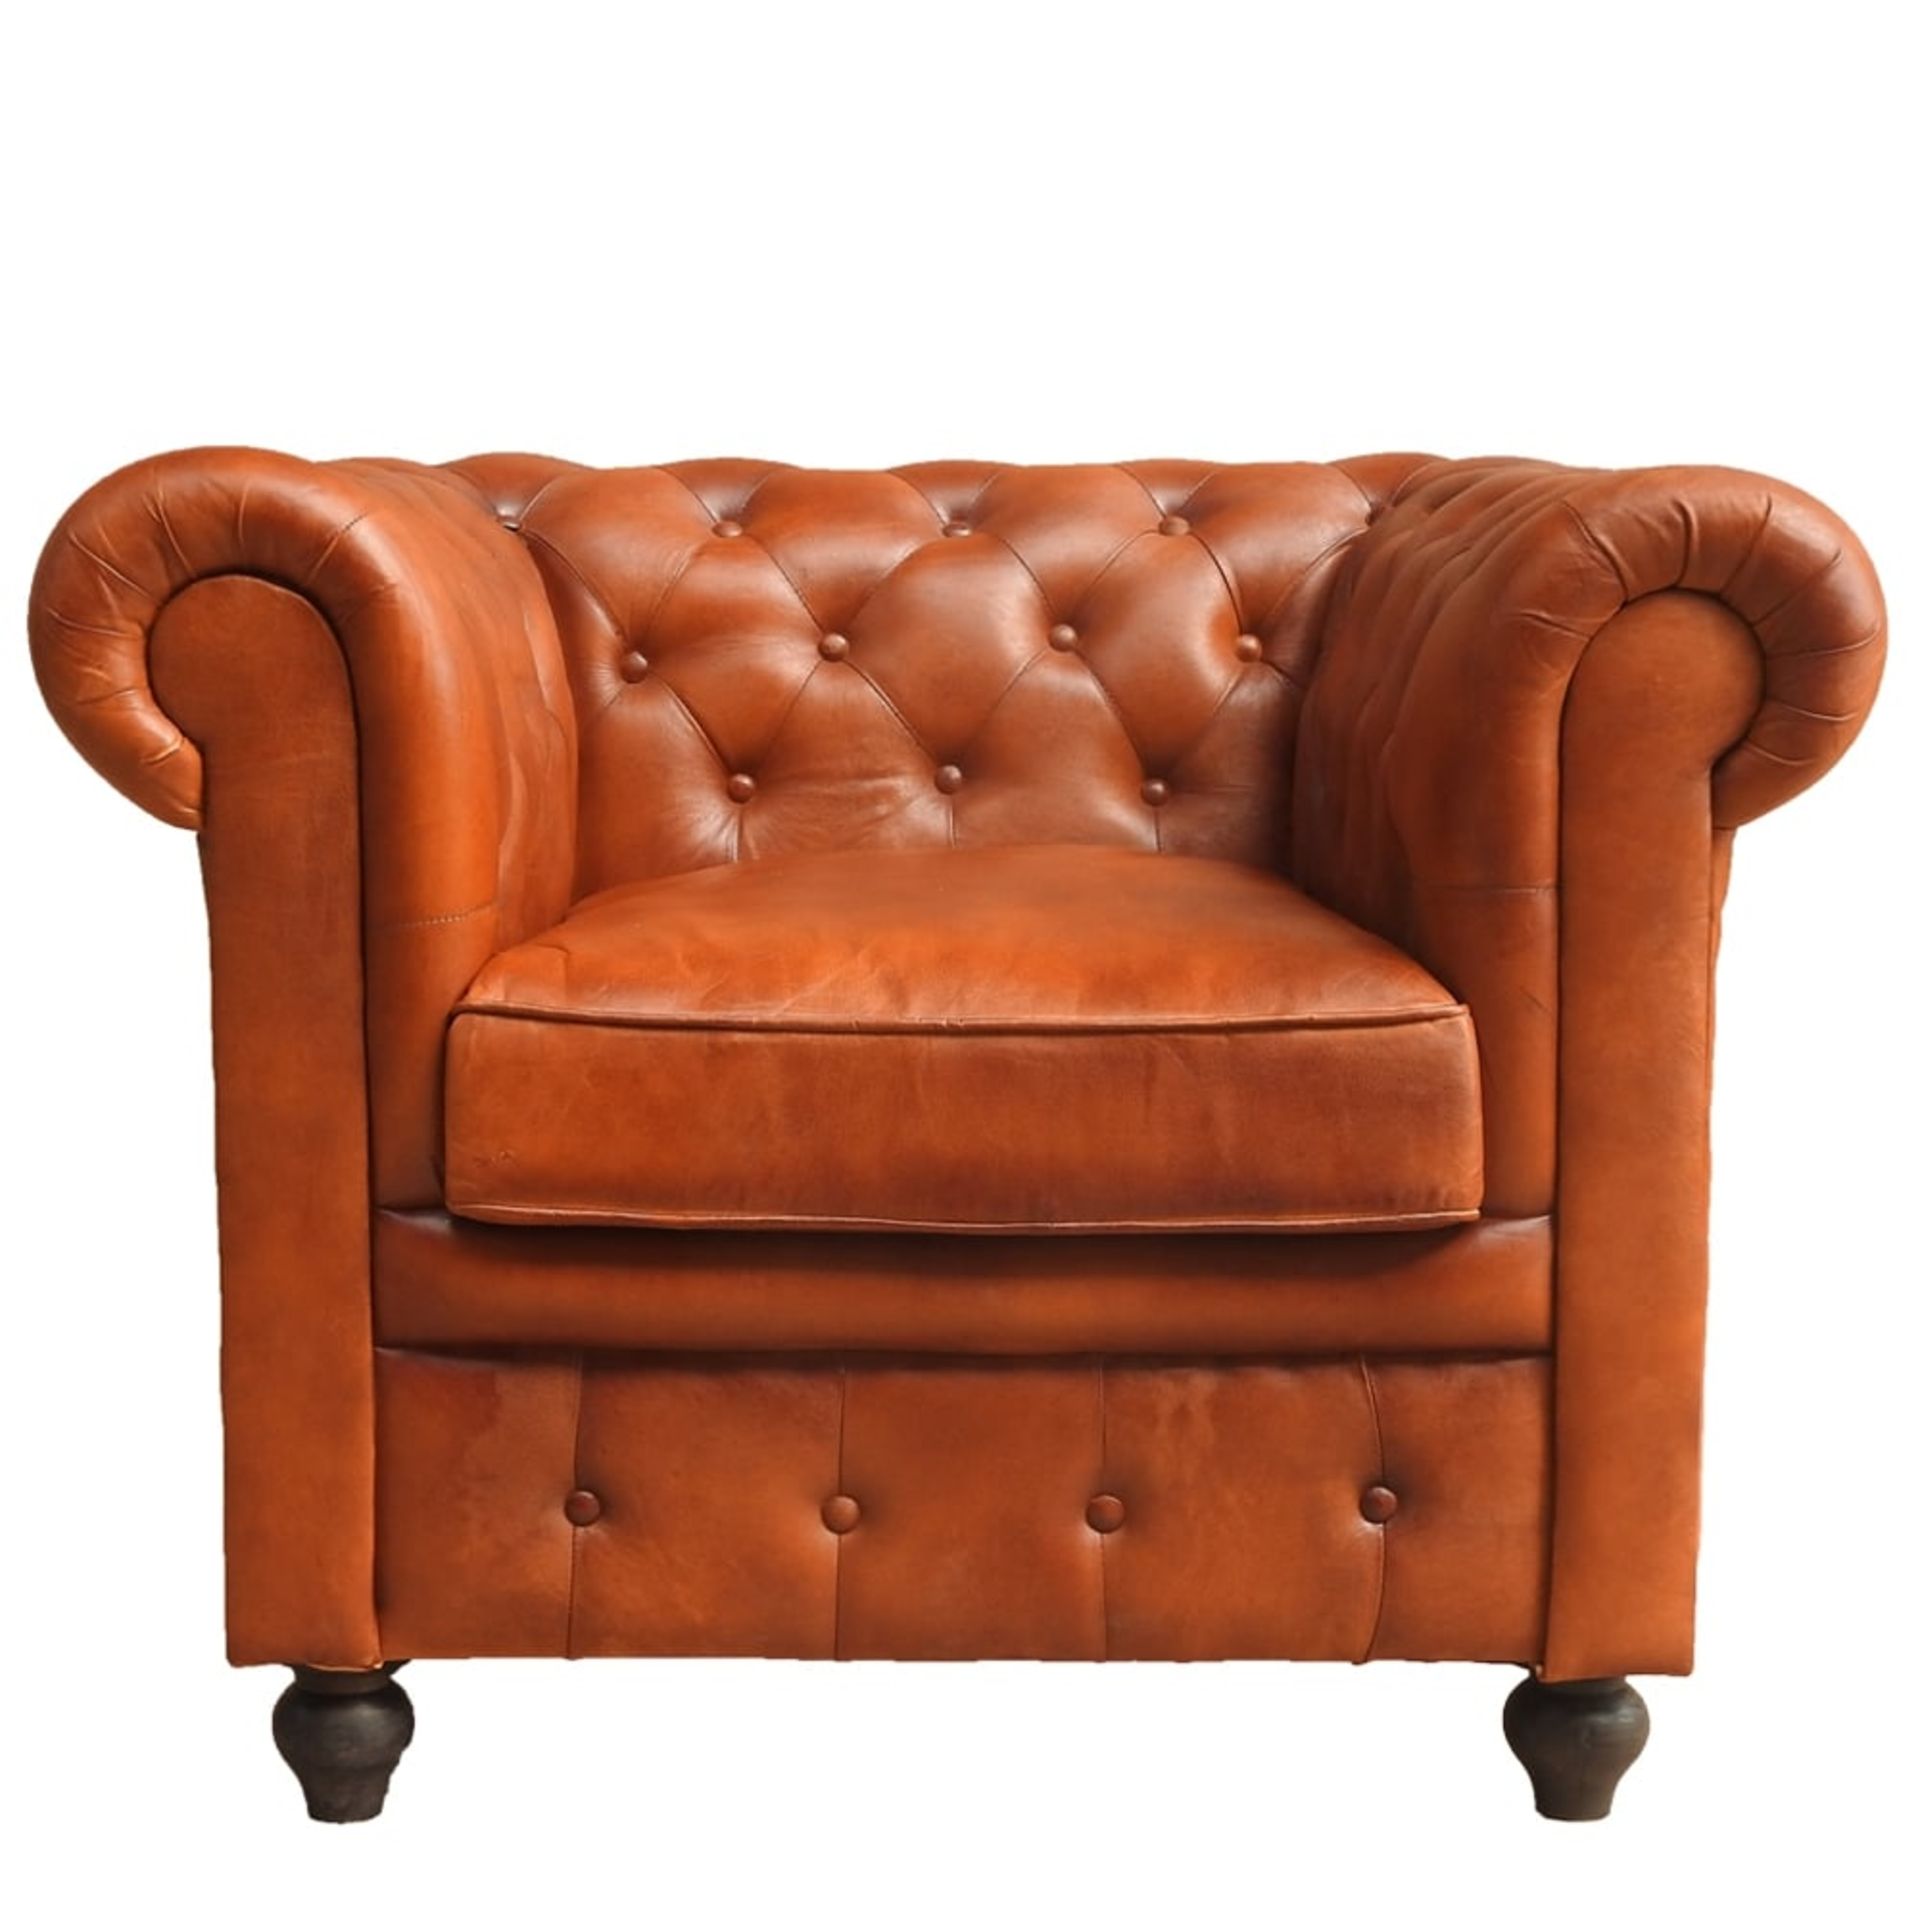 Shoreditch Low Back Leather Chesterfield Club Armchair In Tan